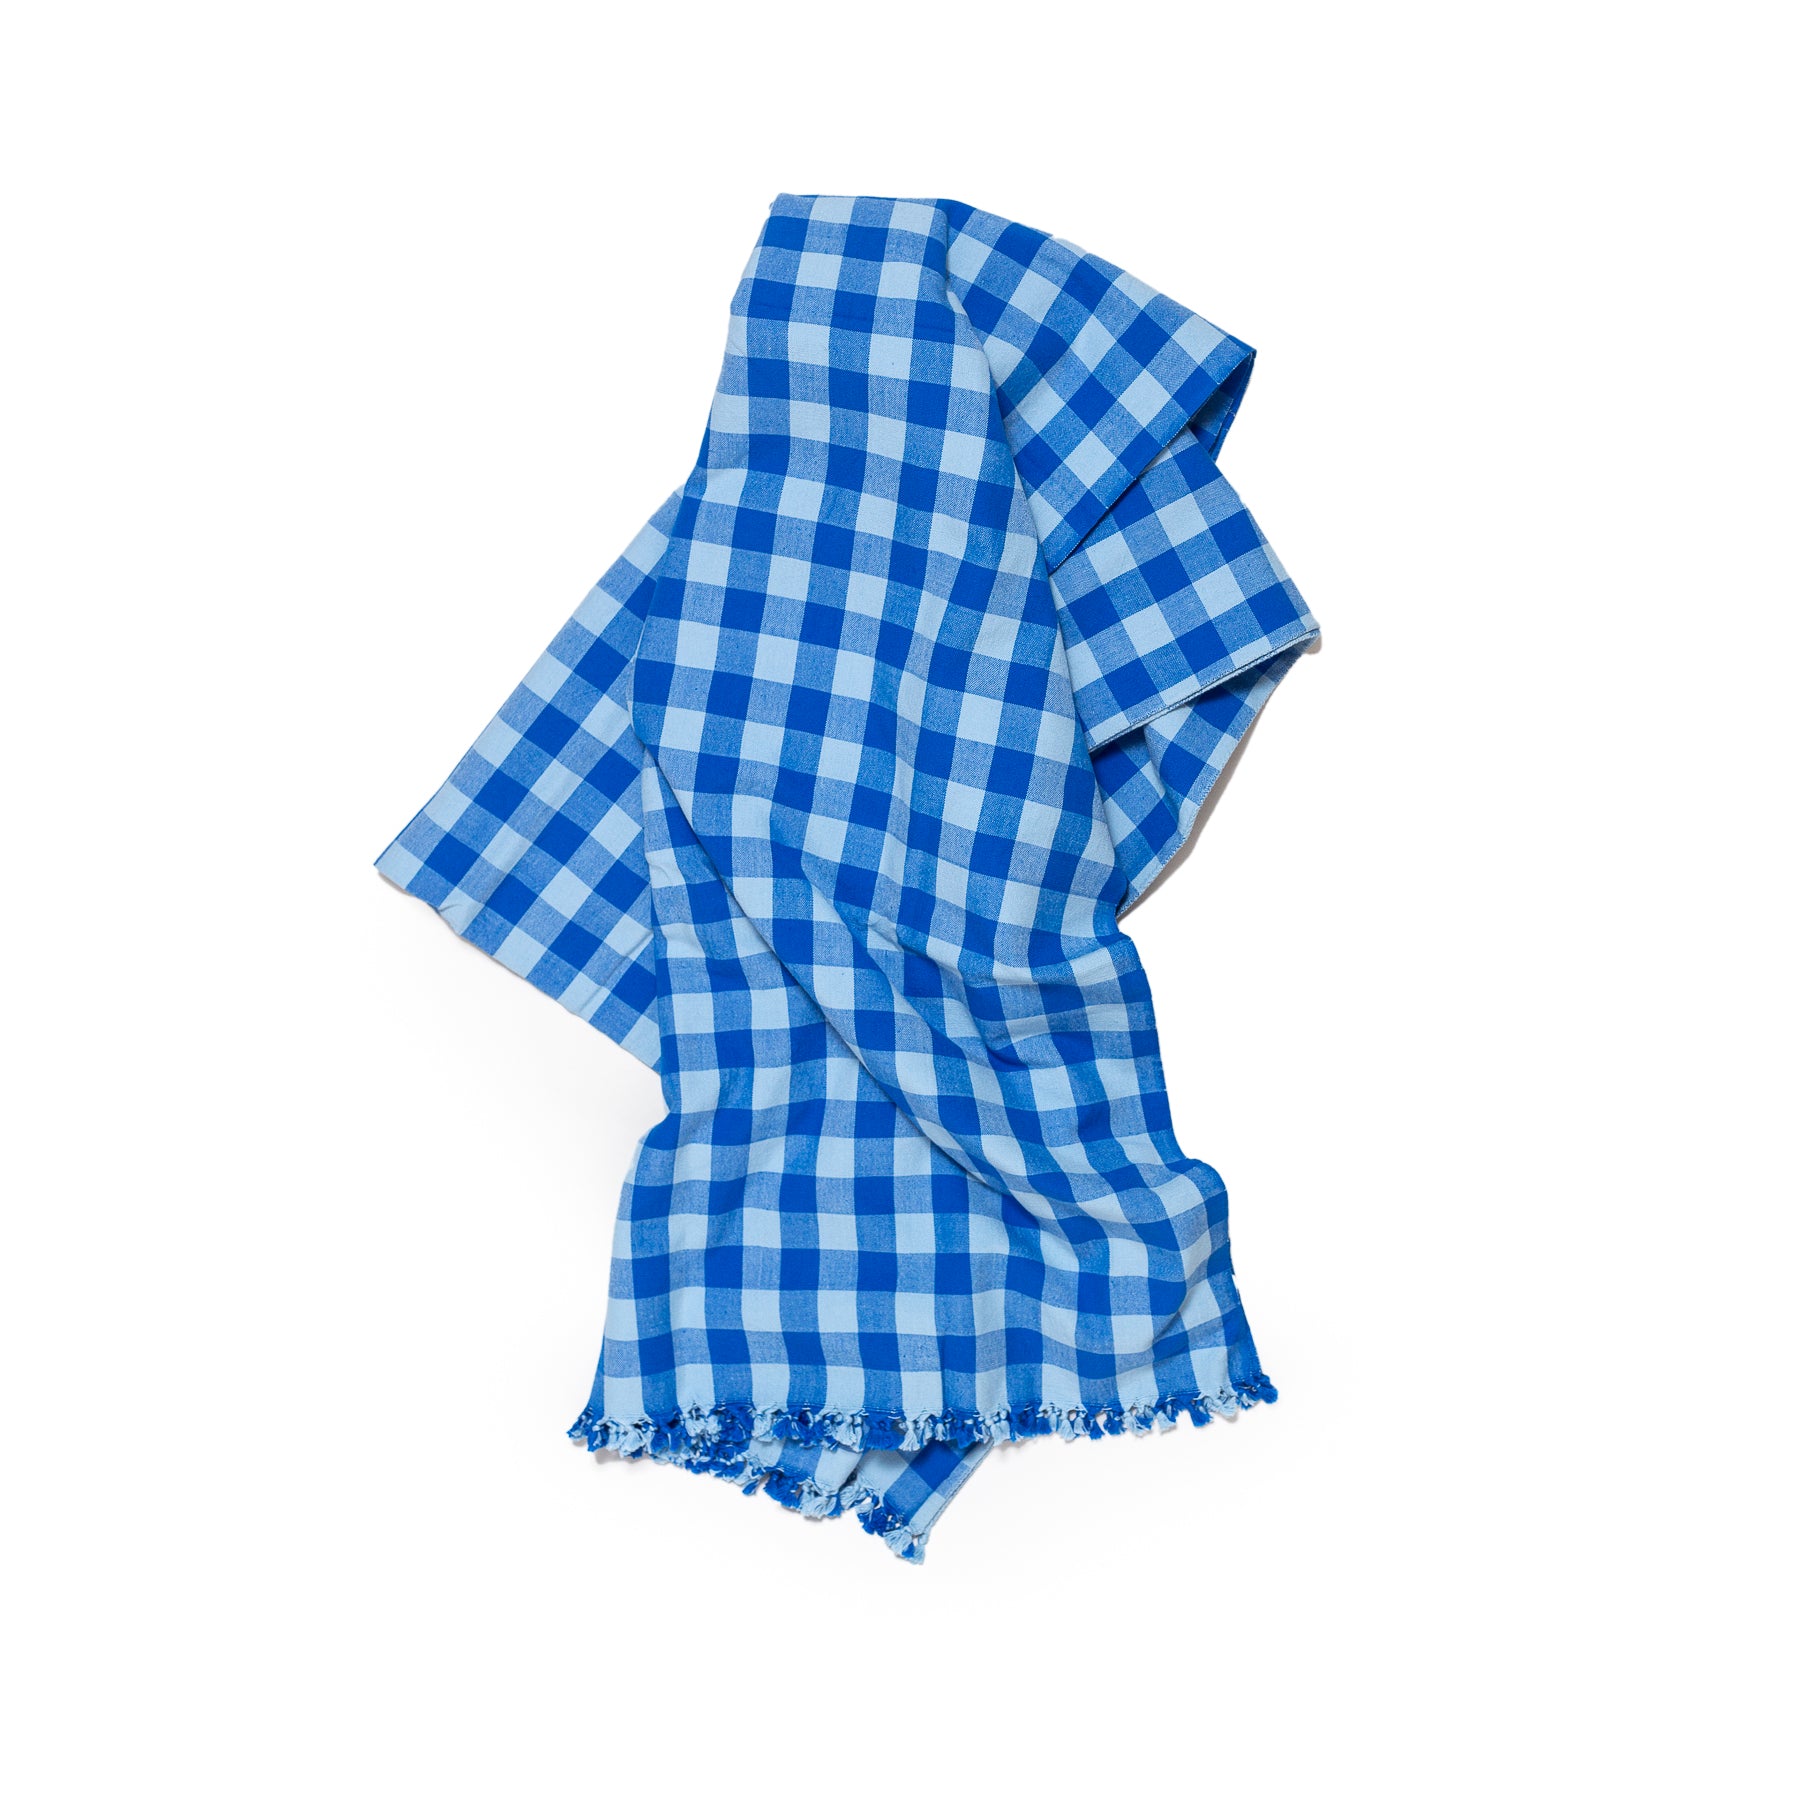 Heather Taylor Blue Gingham Tablecloth